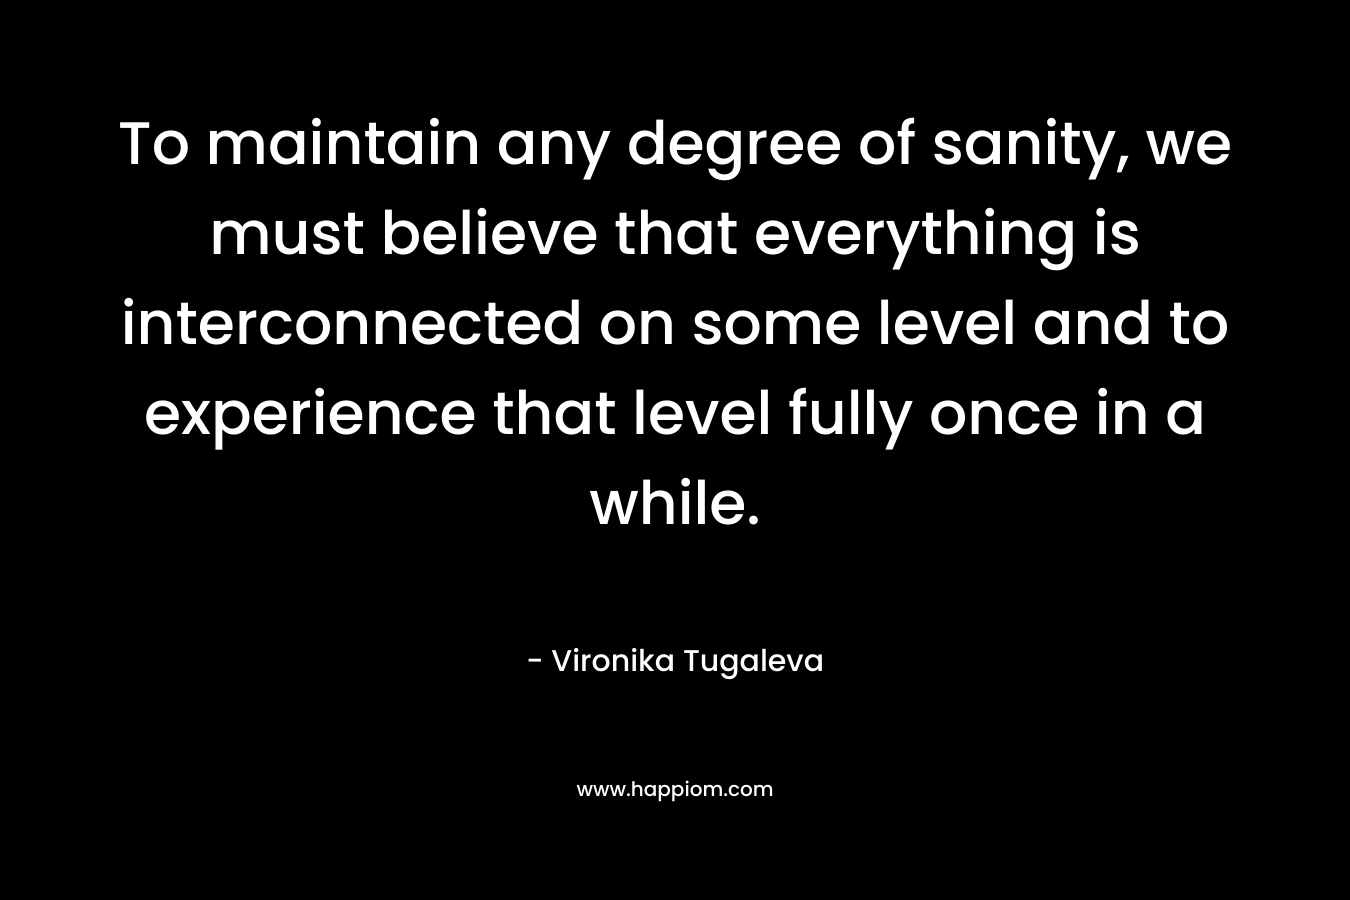 To maintain any degree of sanity, we must believe that everything is interconnected on some level and to experience that level fully once in a while.